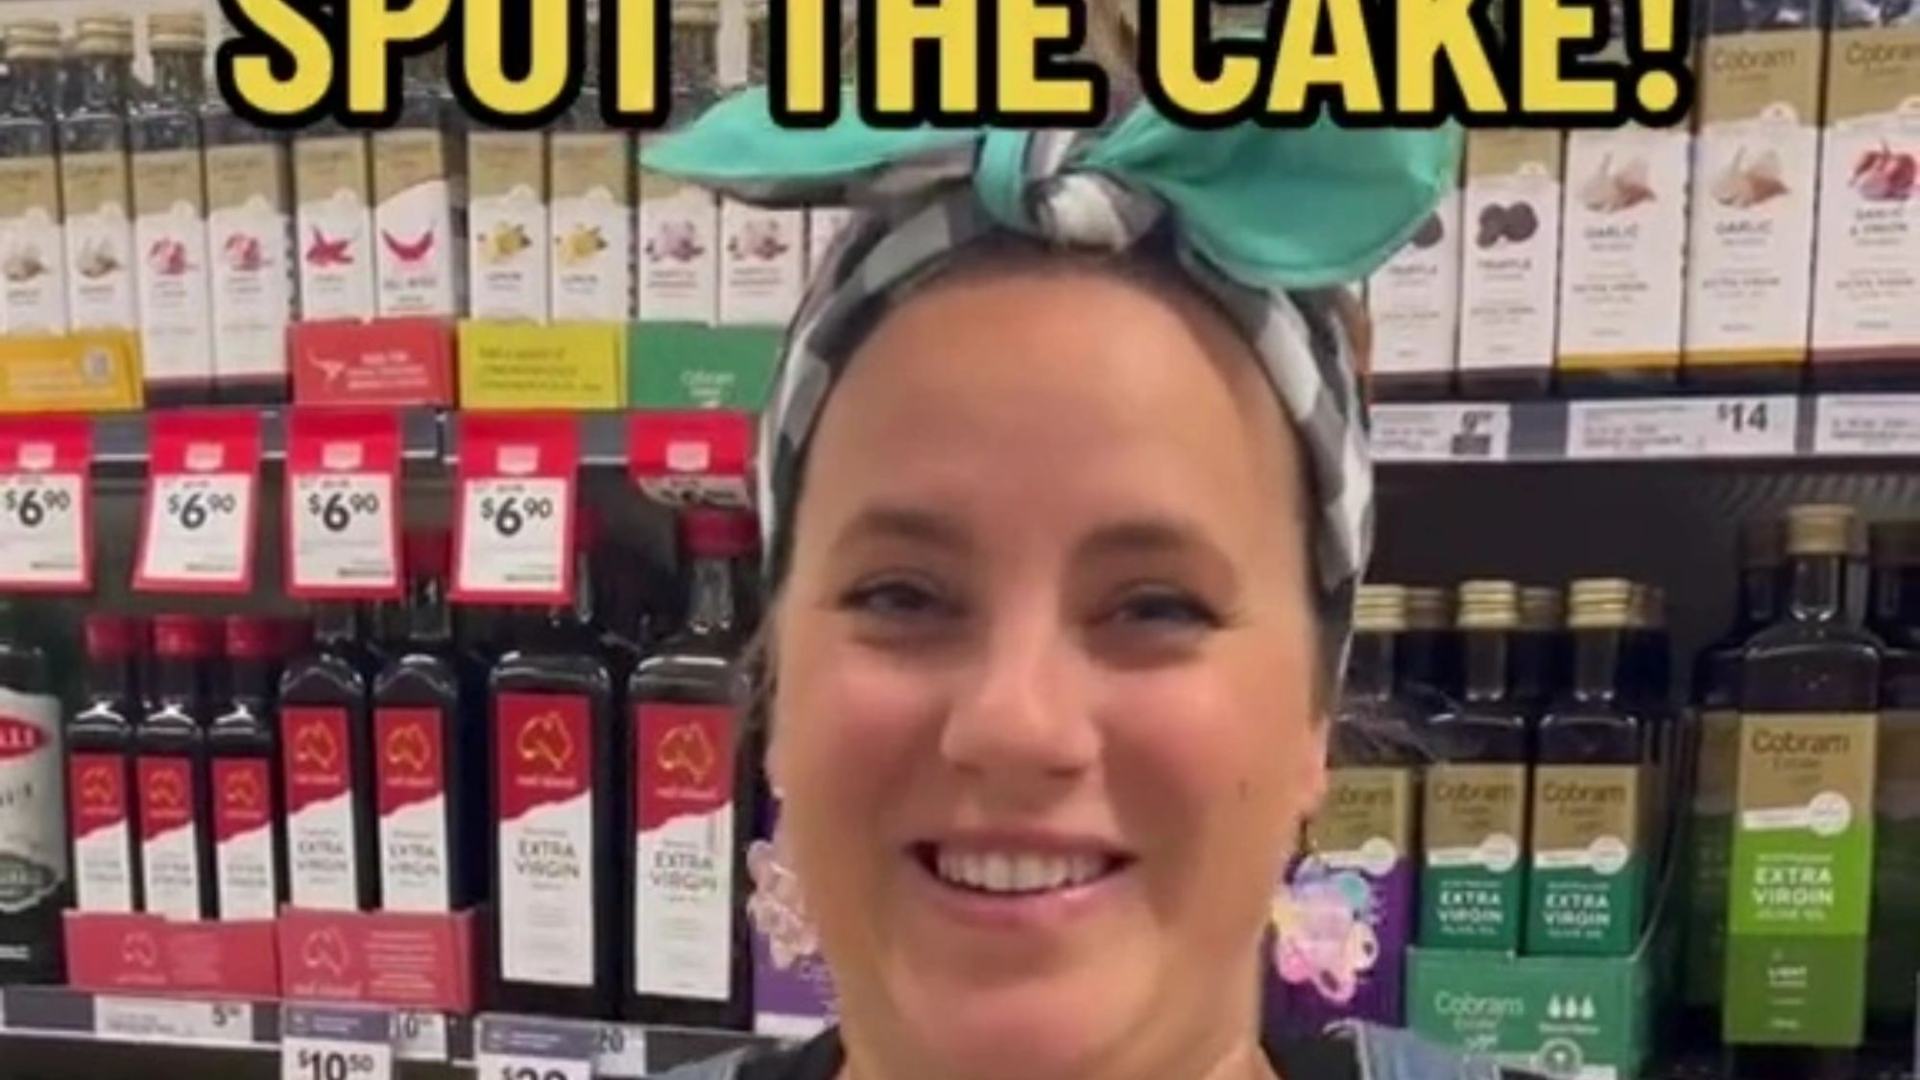 You might be hawk-eyed if you can spot the product-shaped cake hidden in this supermarket aisle